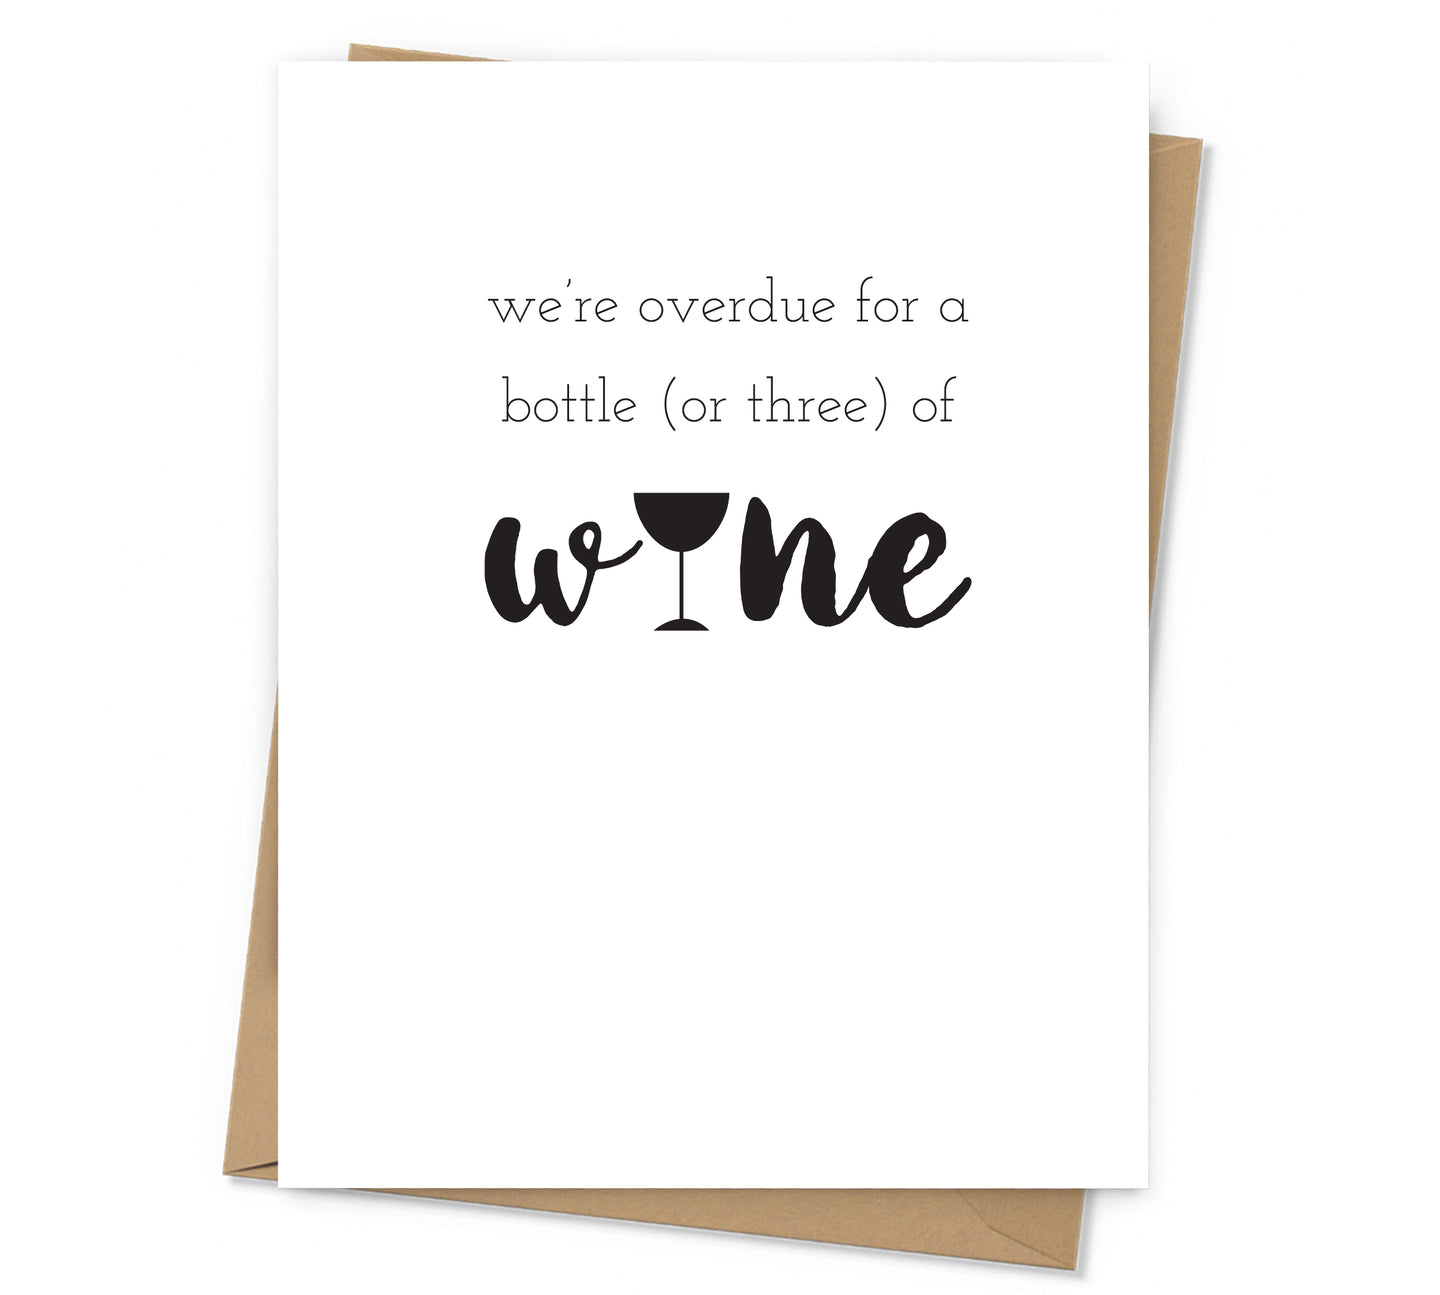 Overdue for Wine Card